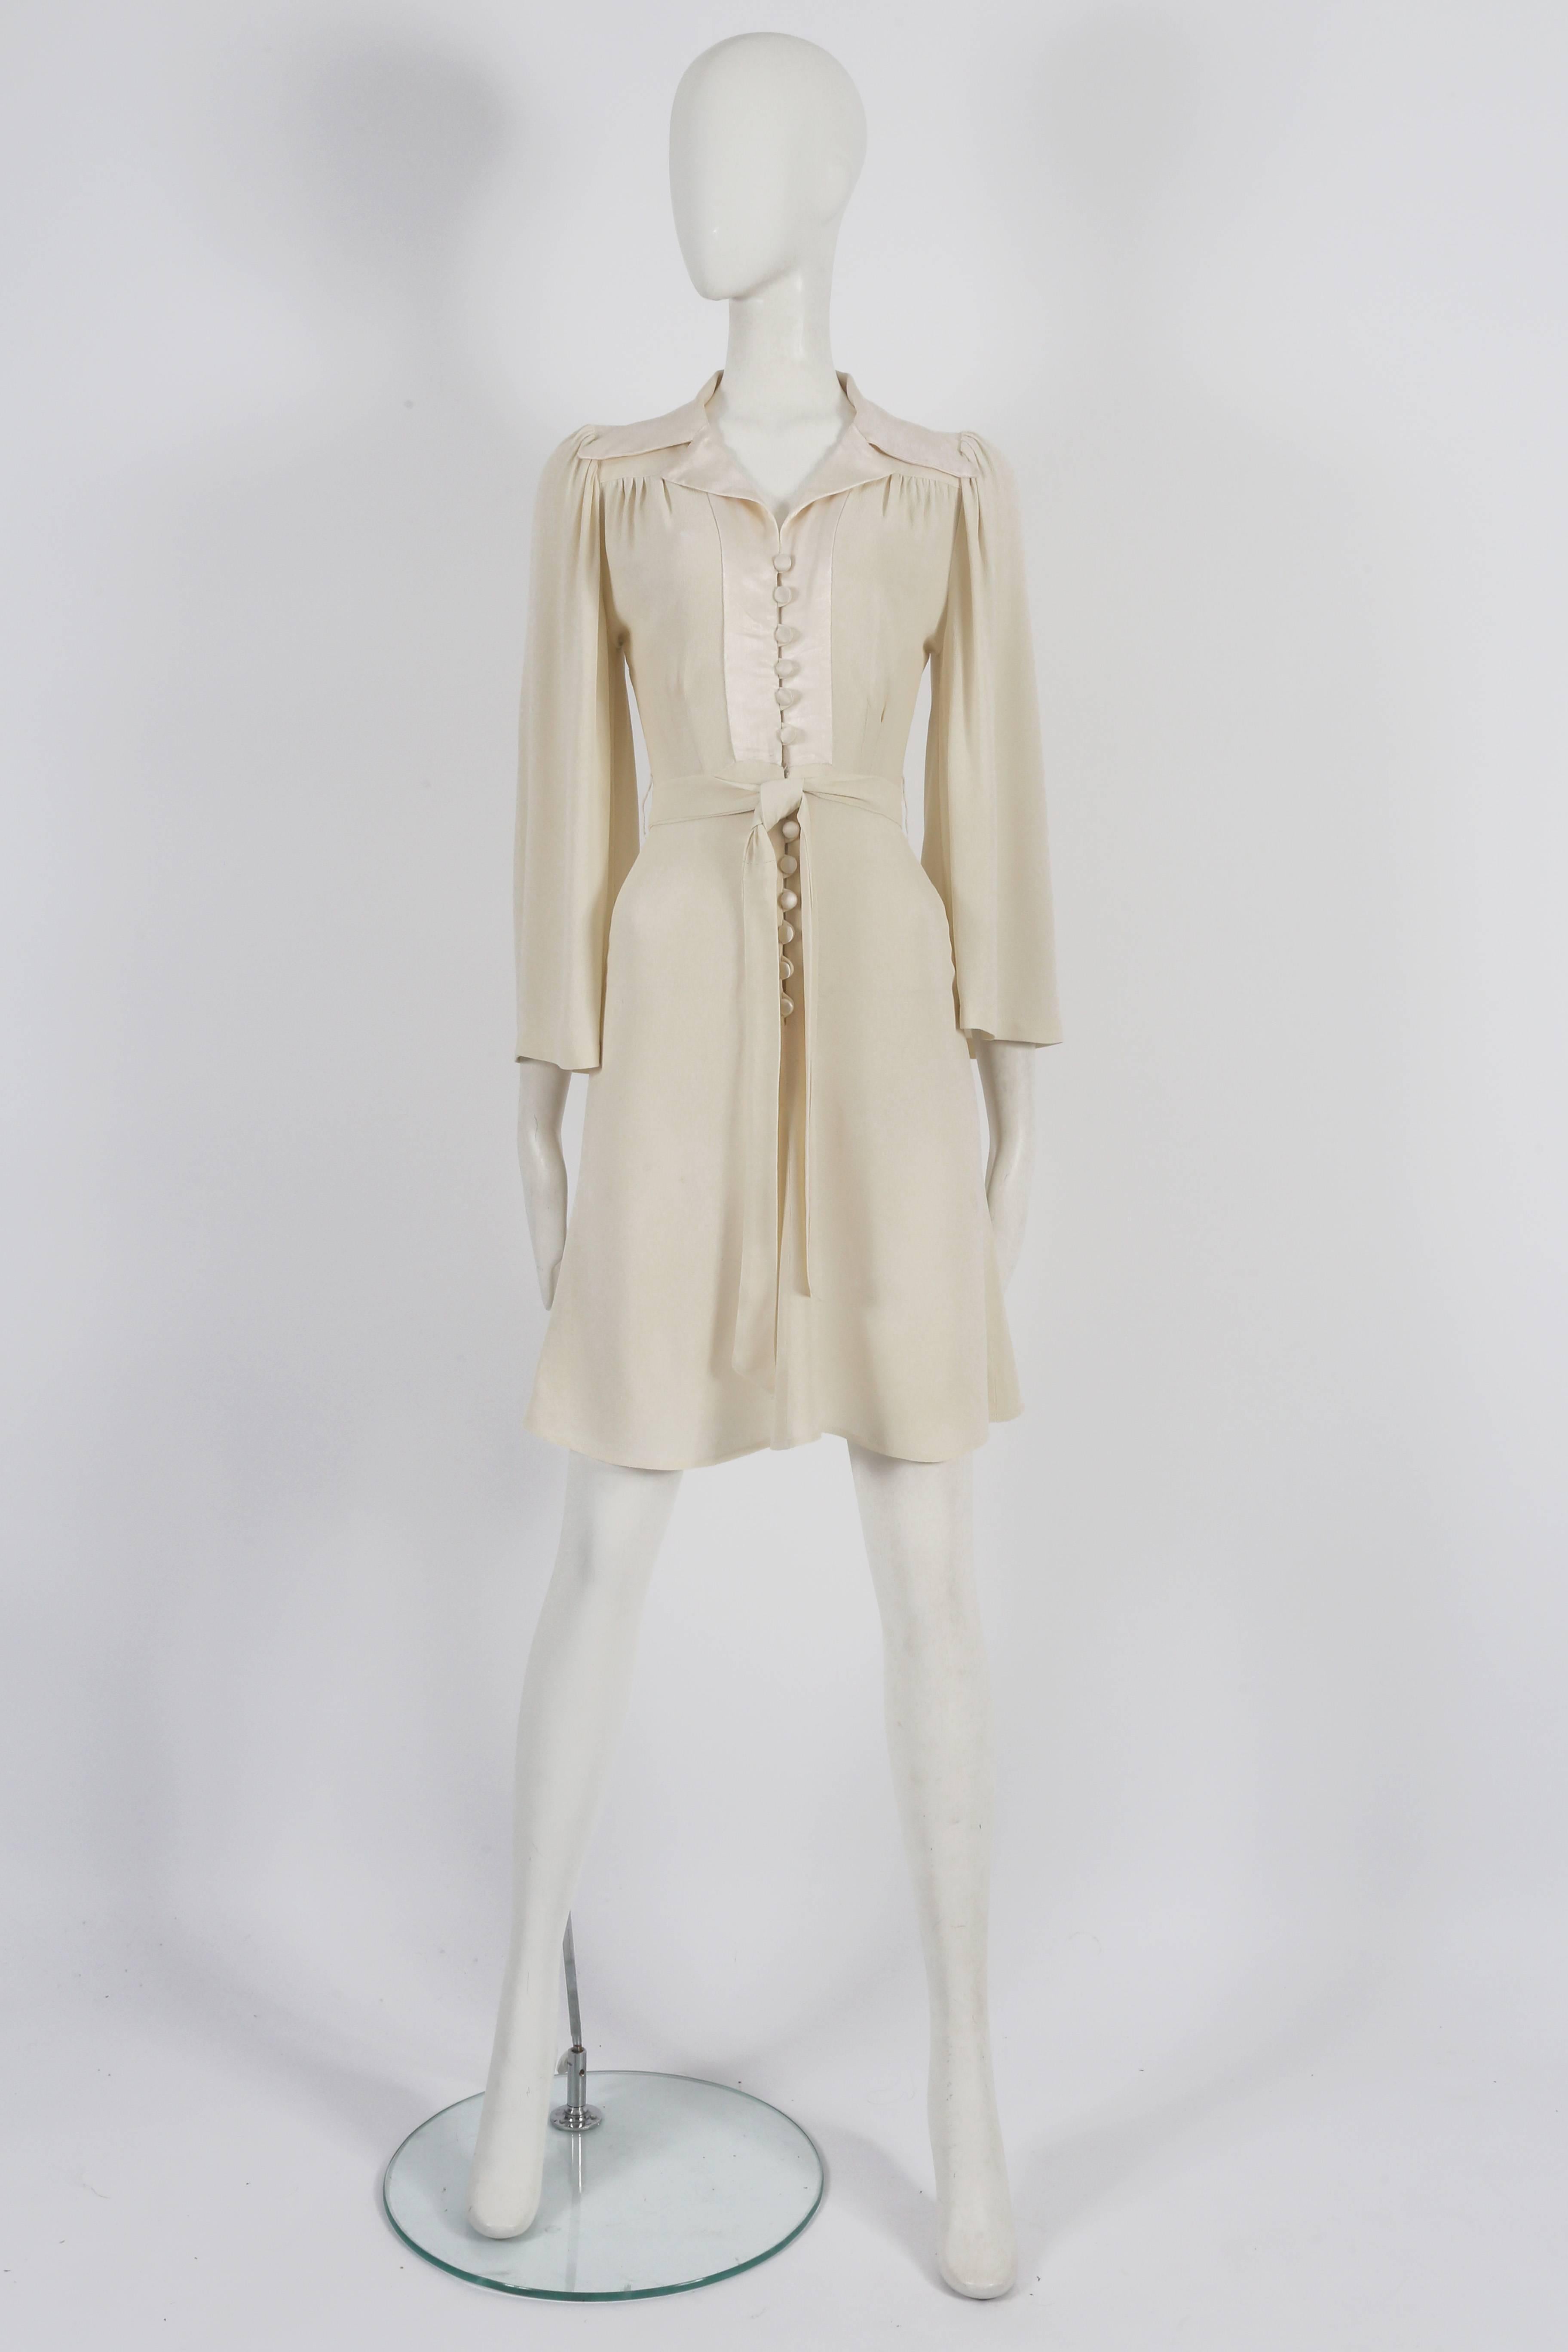 Ossie Clark ivory moss crepe mini dress with satin collar, circa late 1960s. Cropped wide sleeve, fabric button closures and matching waist belt.